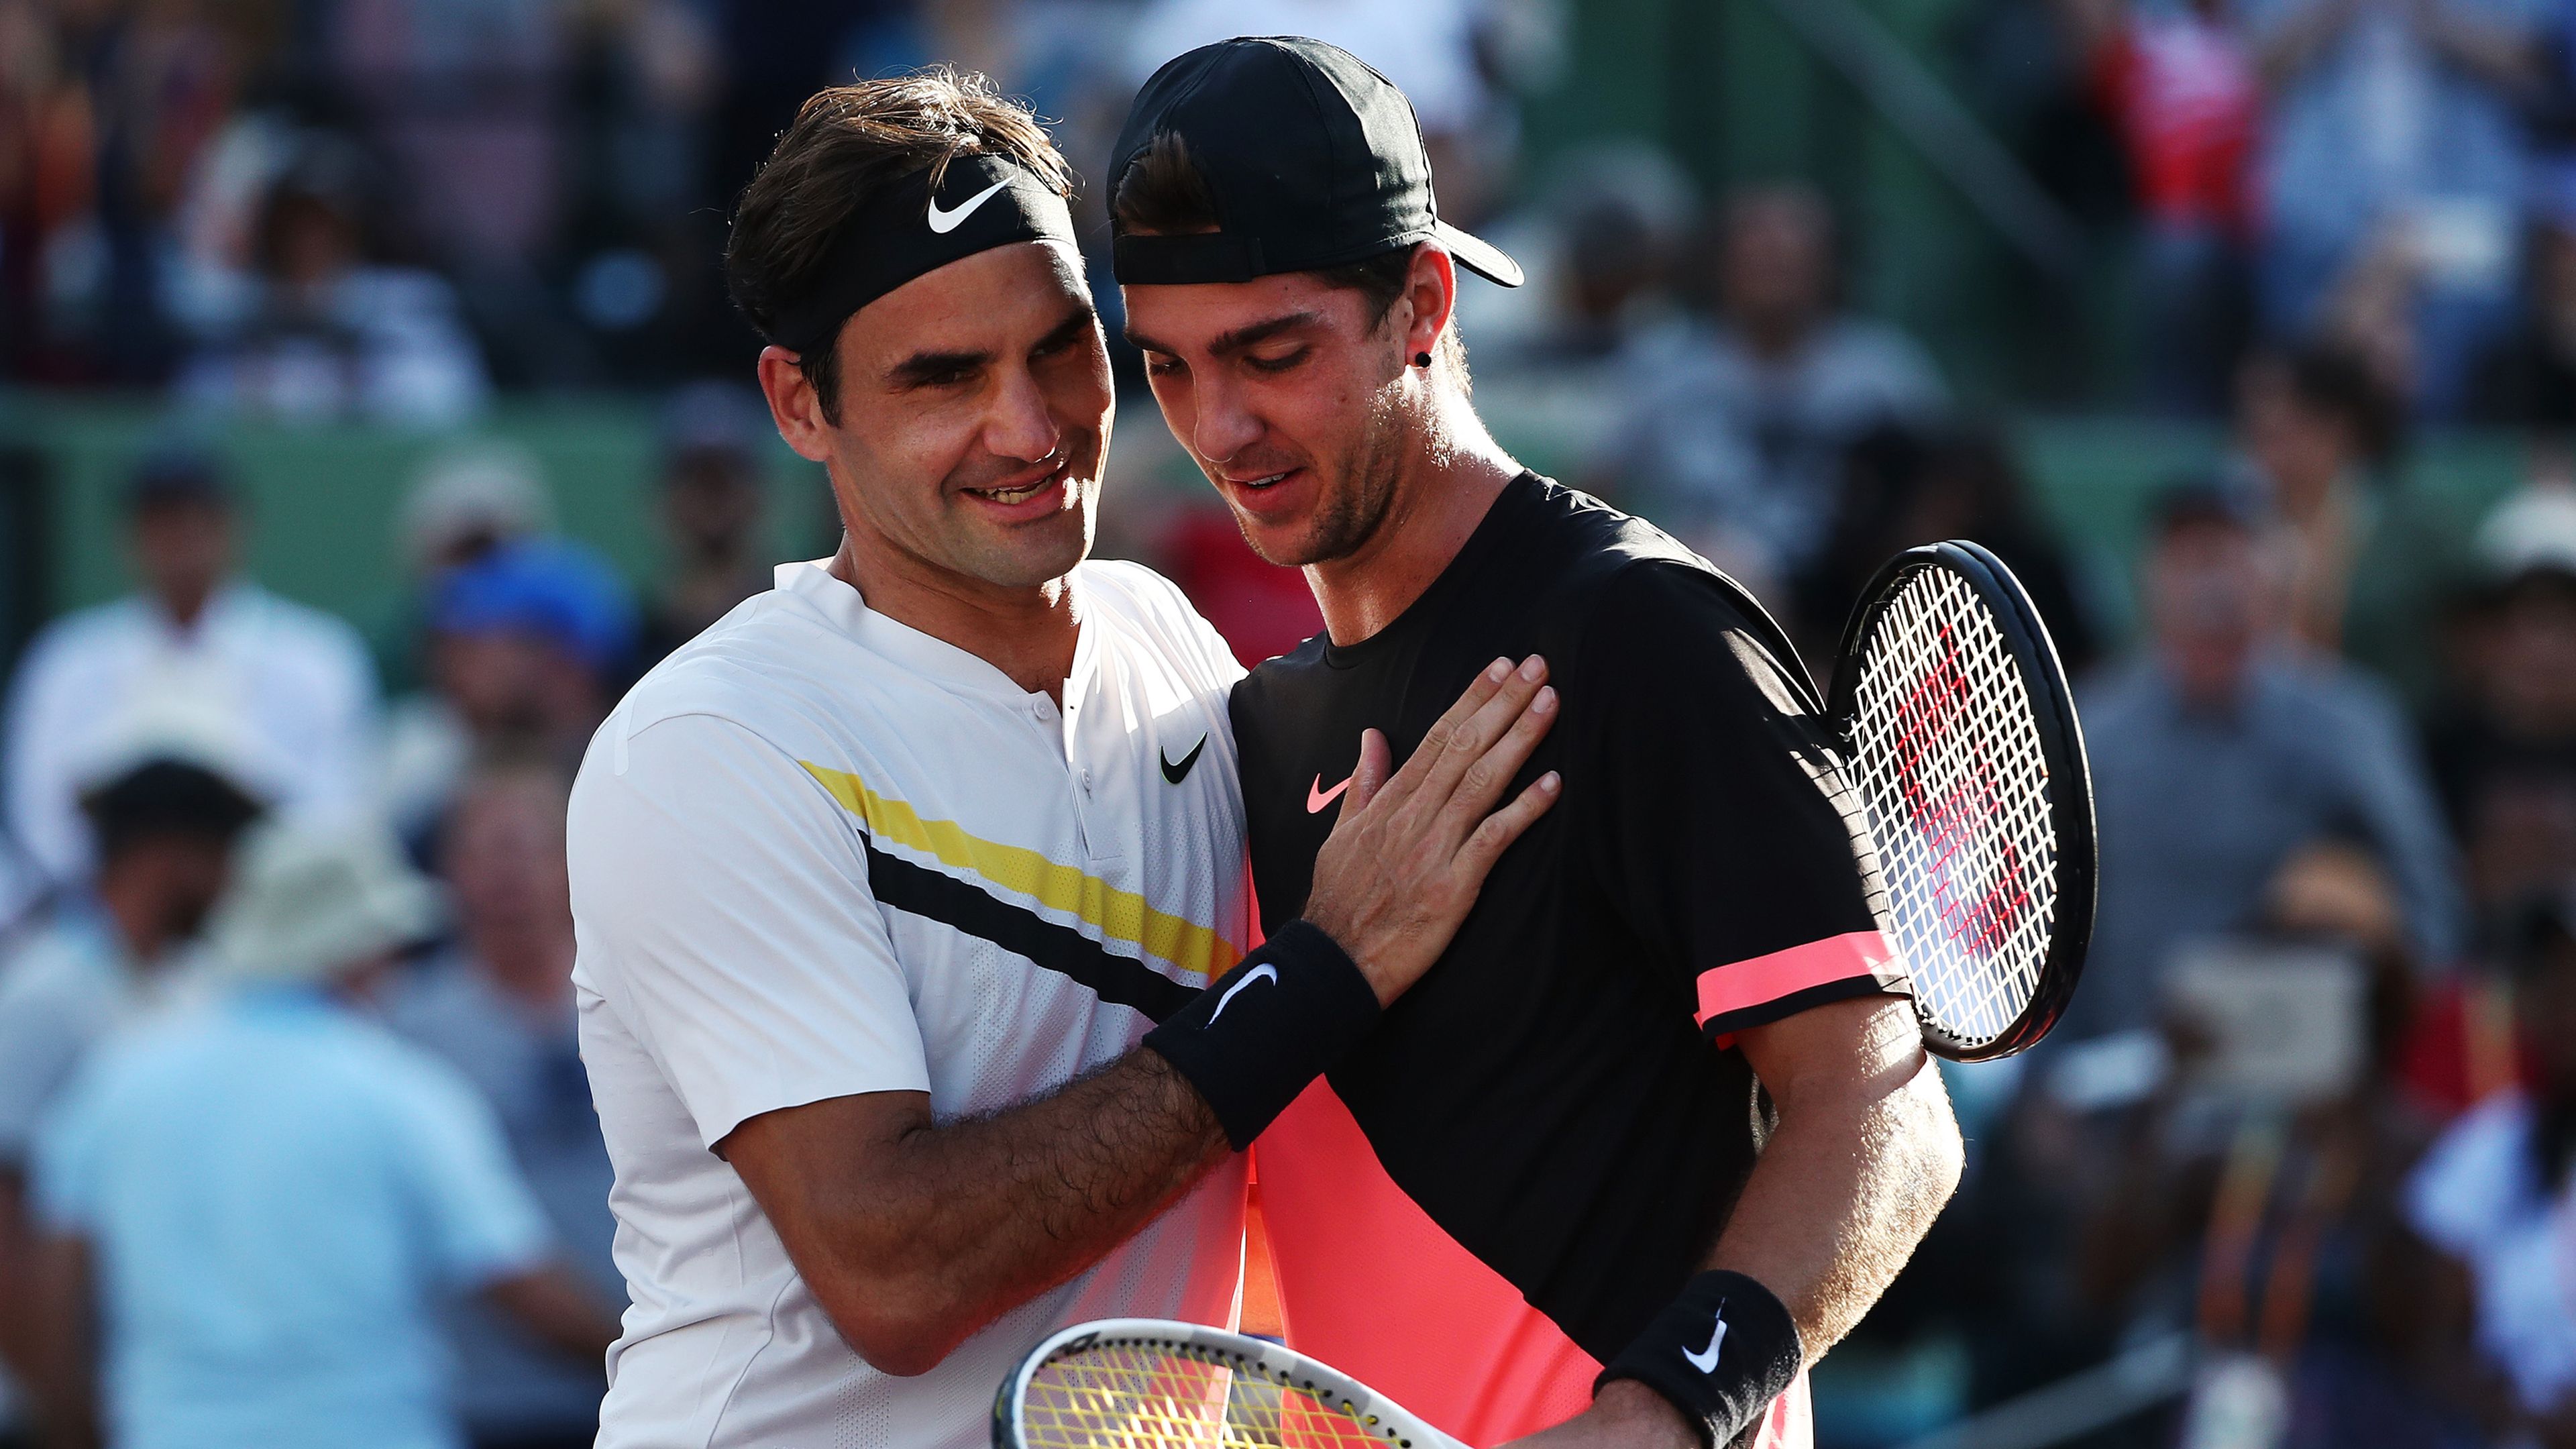 Thanasi Kokkinakis receives congratulatory message from Roger Federer after claiming first ATP singles title